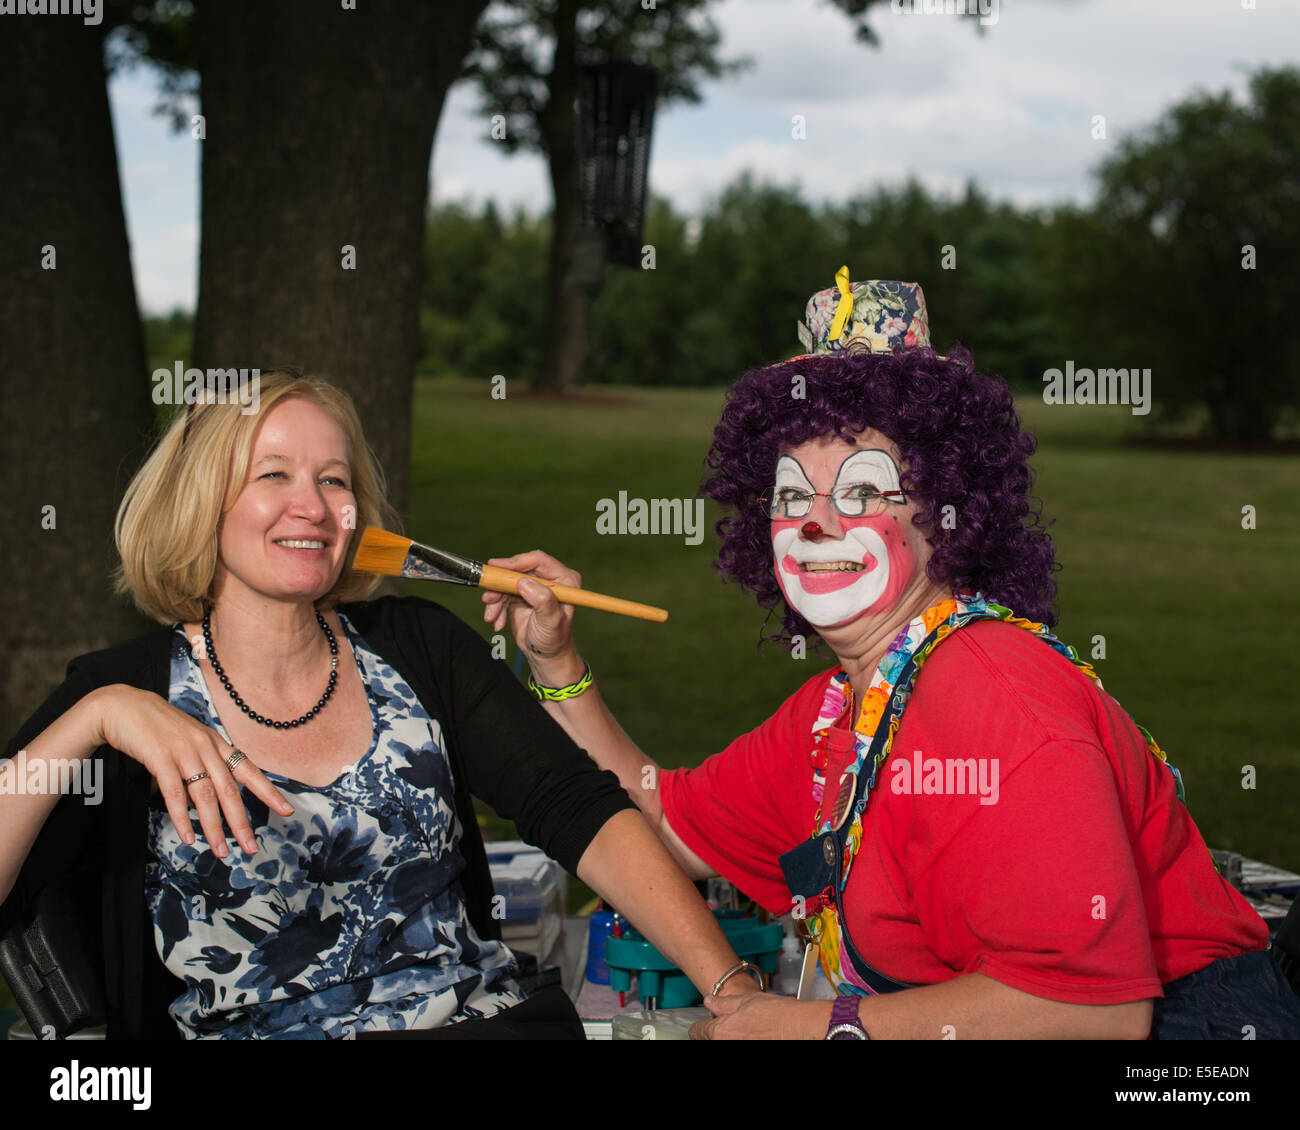 Mrs. Laureen Harper gets painted by Sneezy the Clown at a BBQ for the Milton Conservative Association, in Moffat, Ontario. Stock Photo